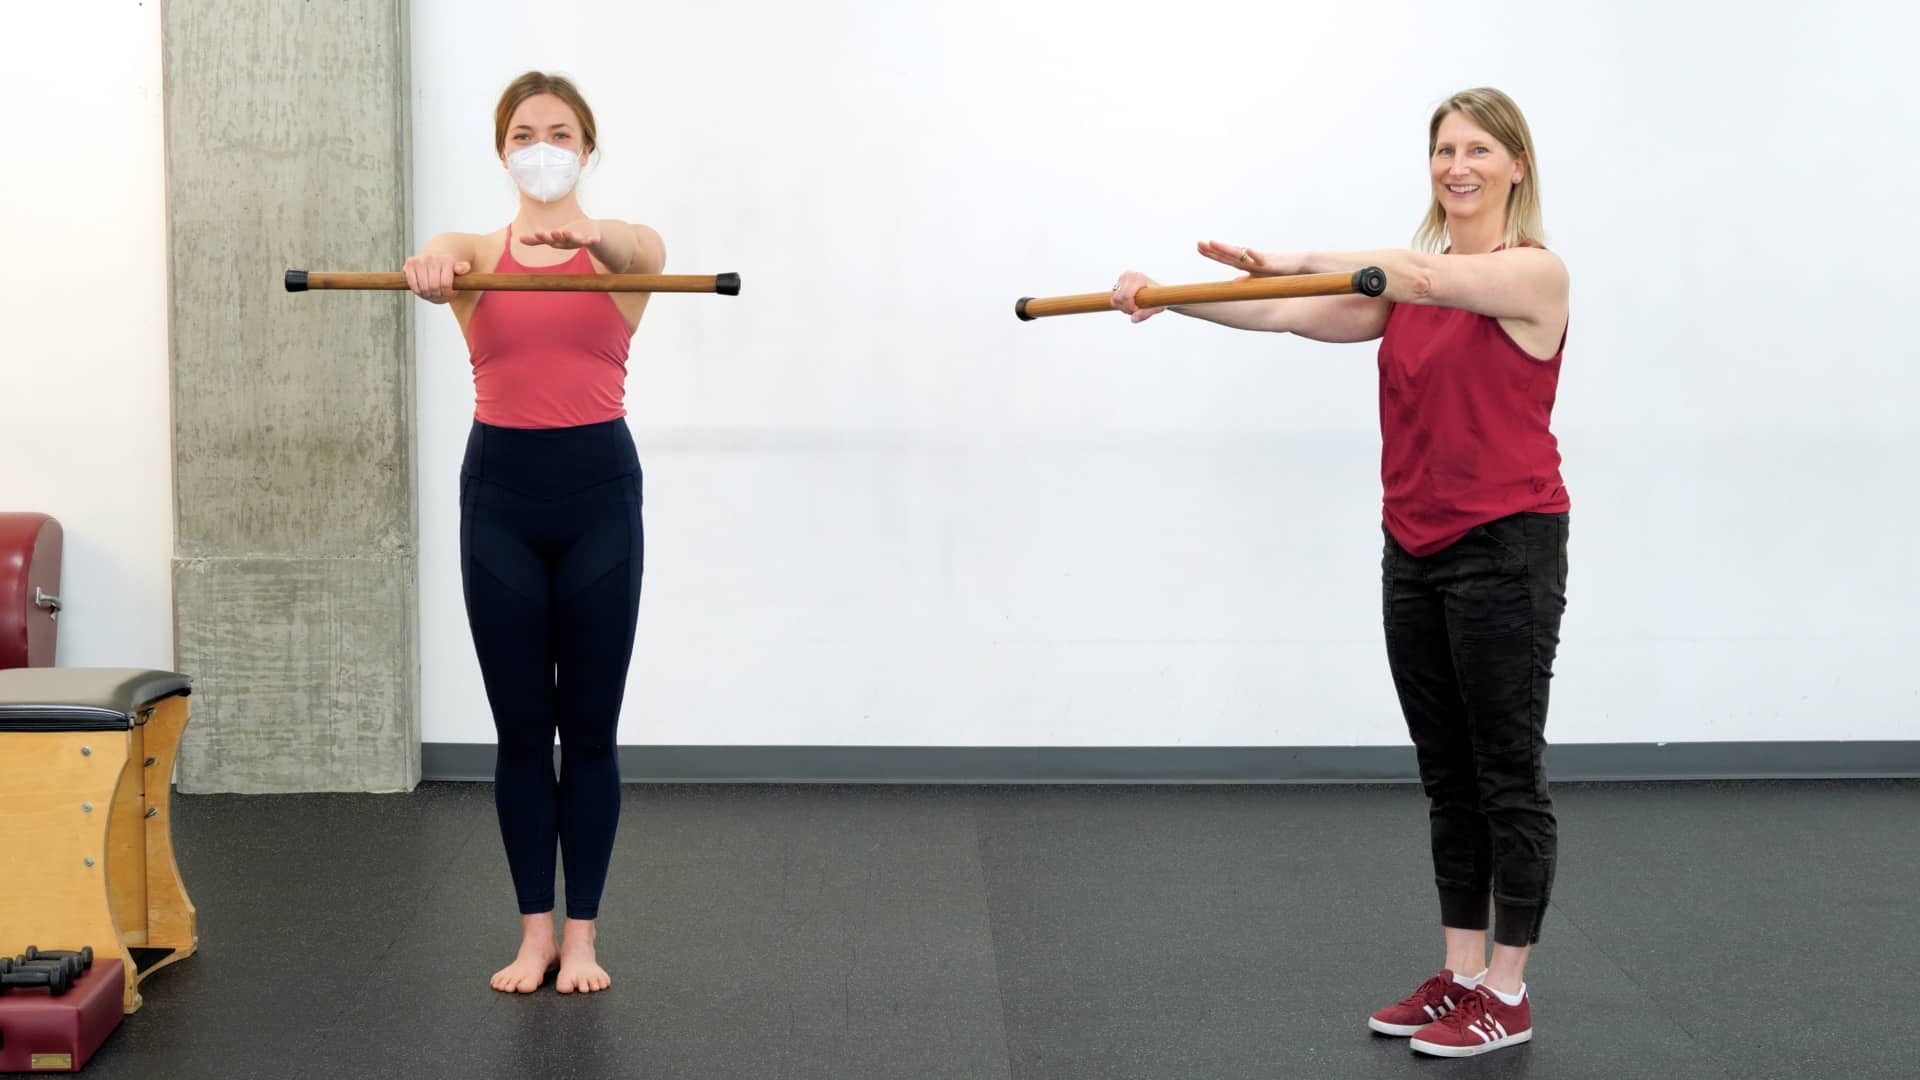 Pilates Exercises that Add Strength to Mobility Movements